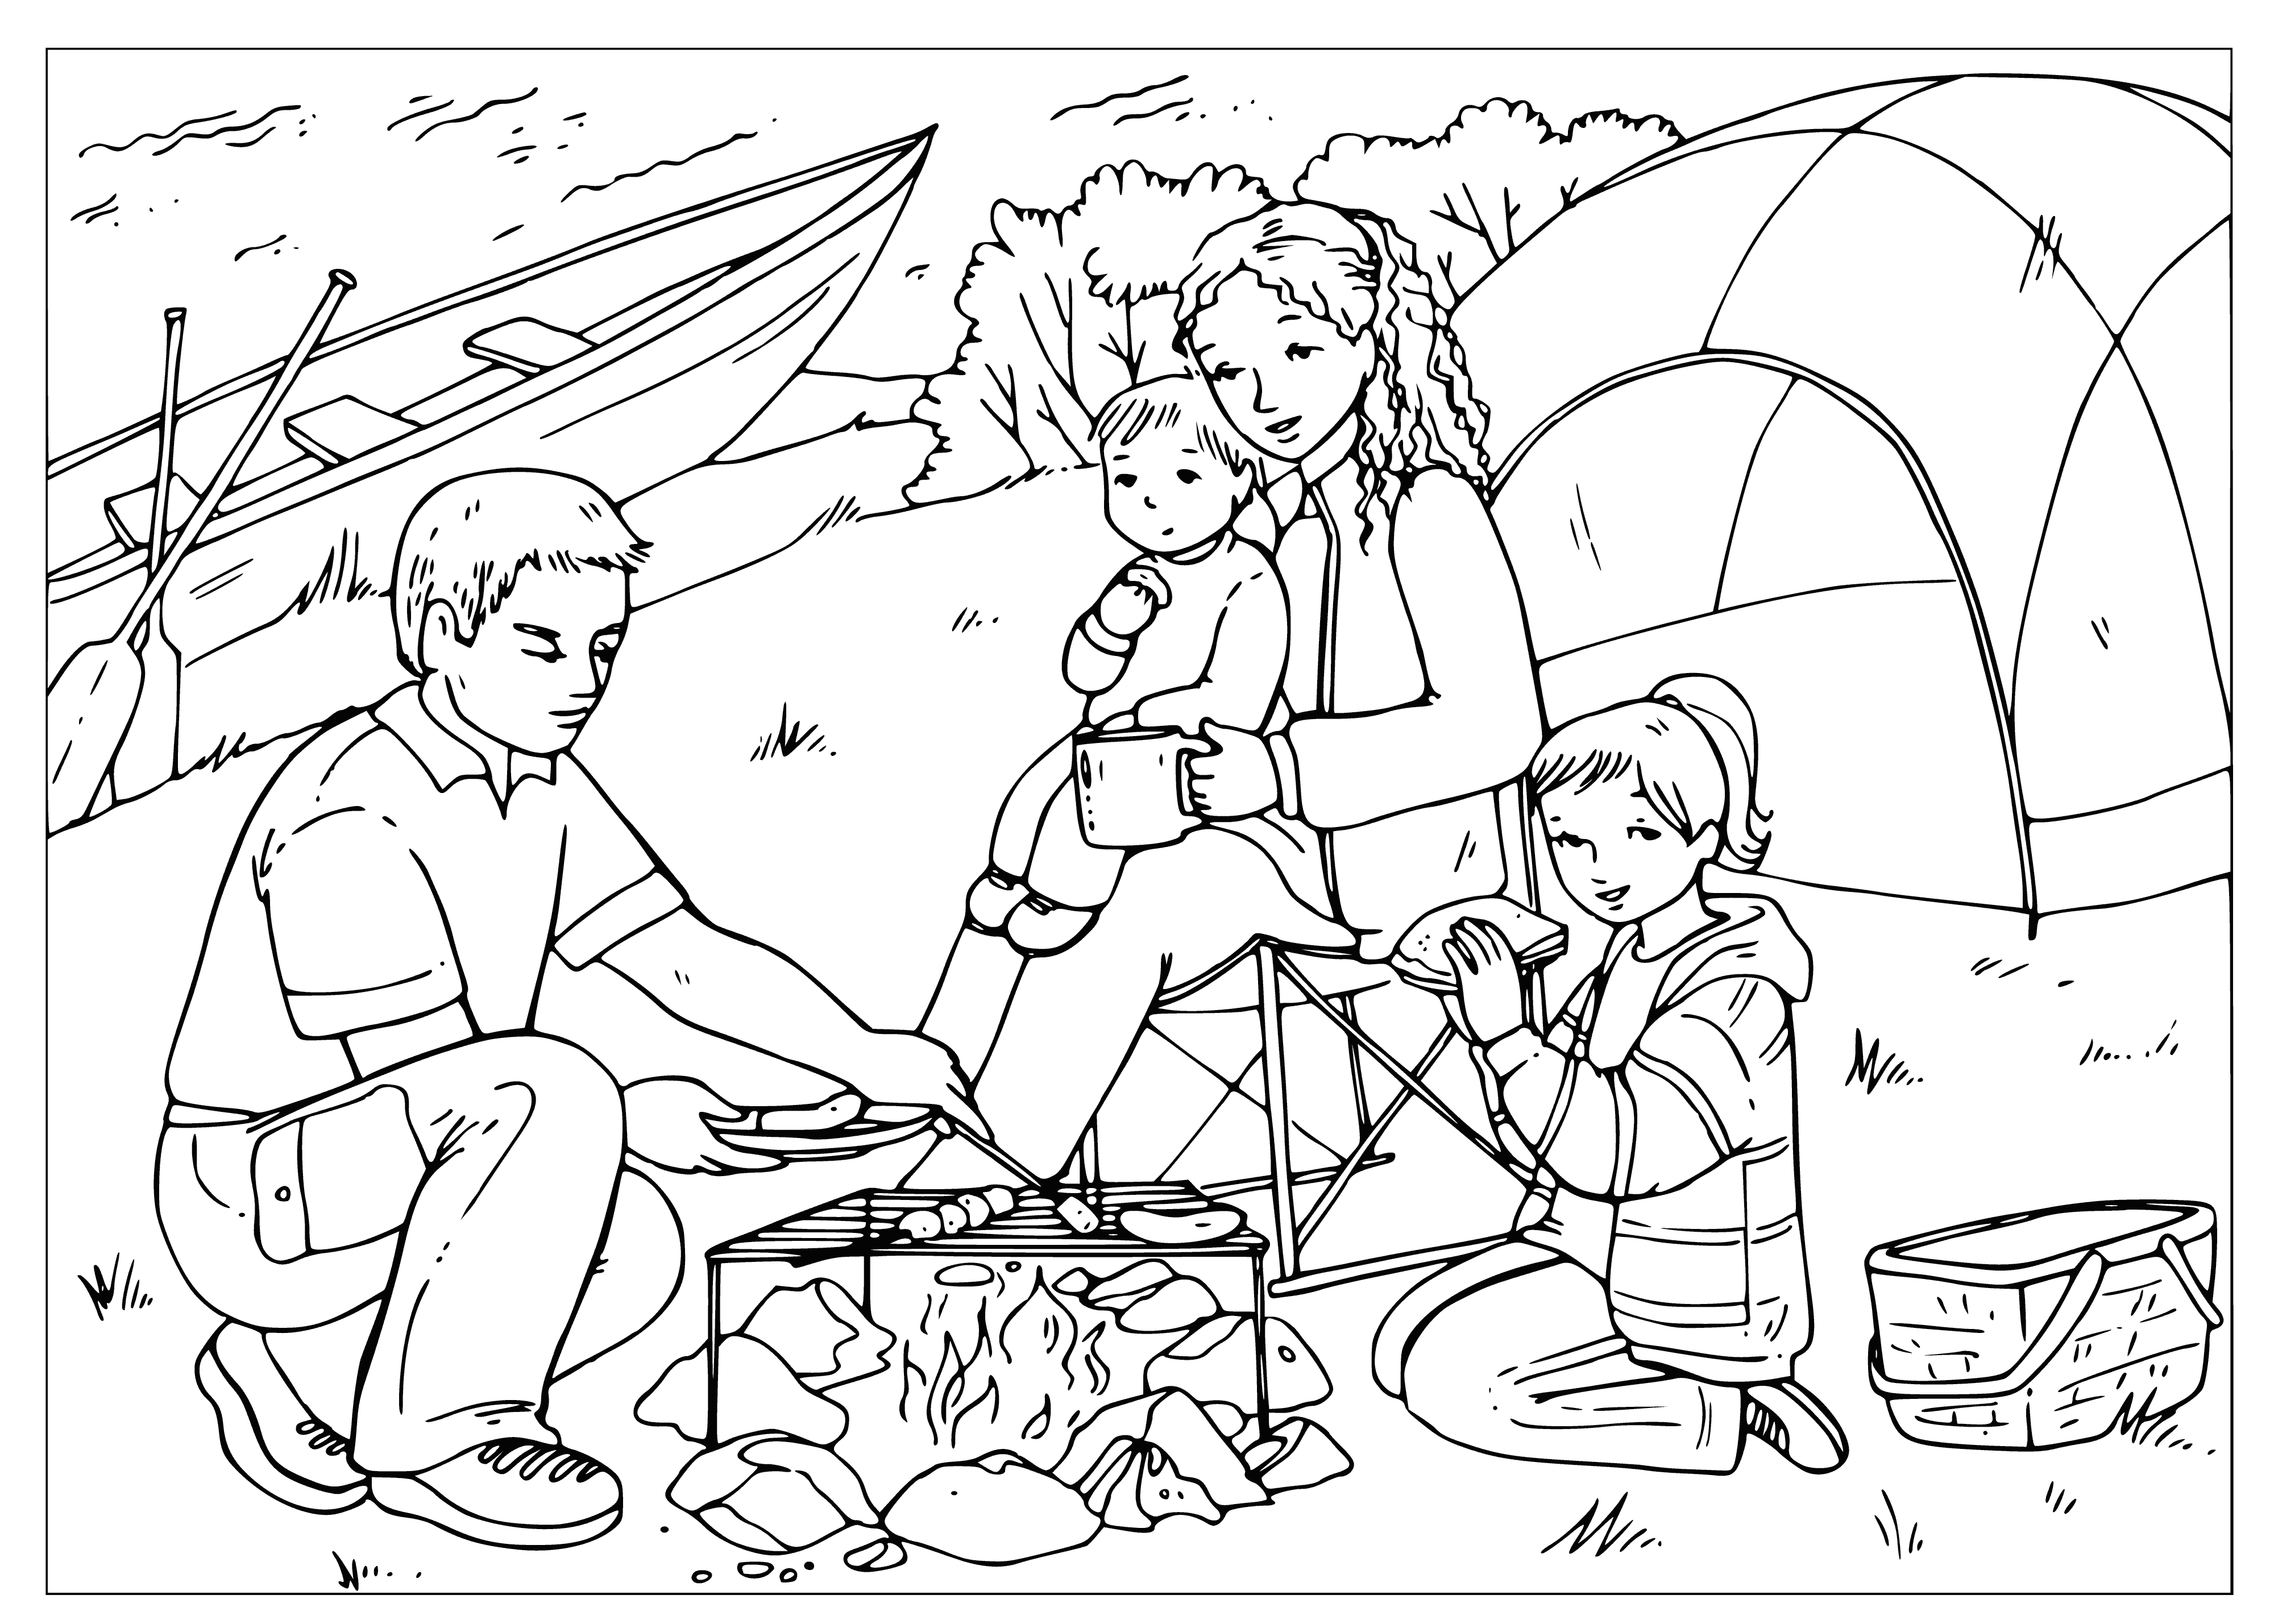 coloring page: Family making memories by a summer fire, roasting marshmallows & having fun.